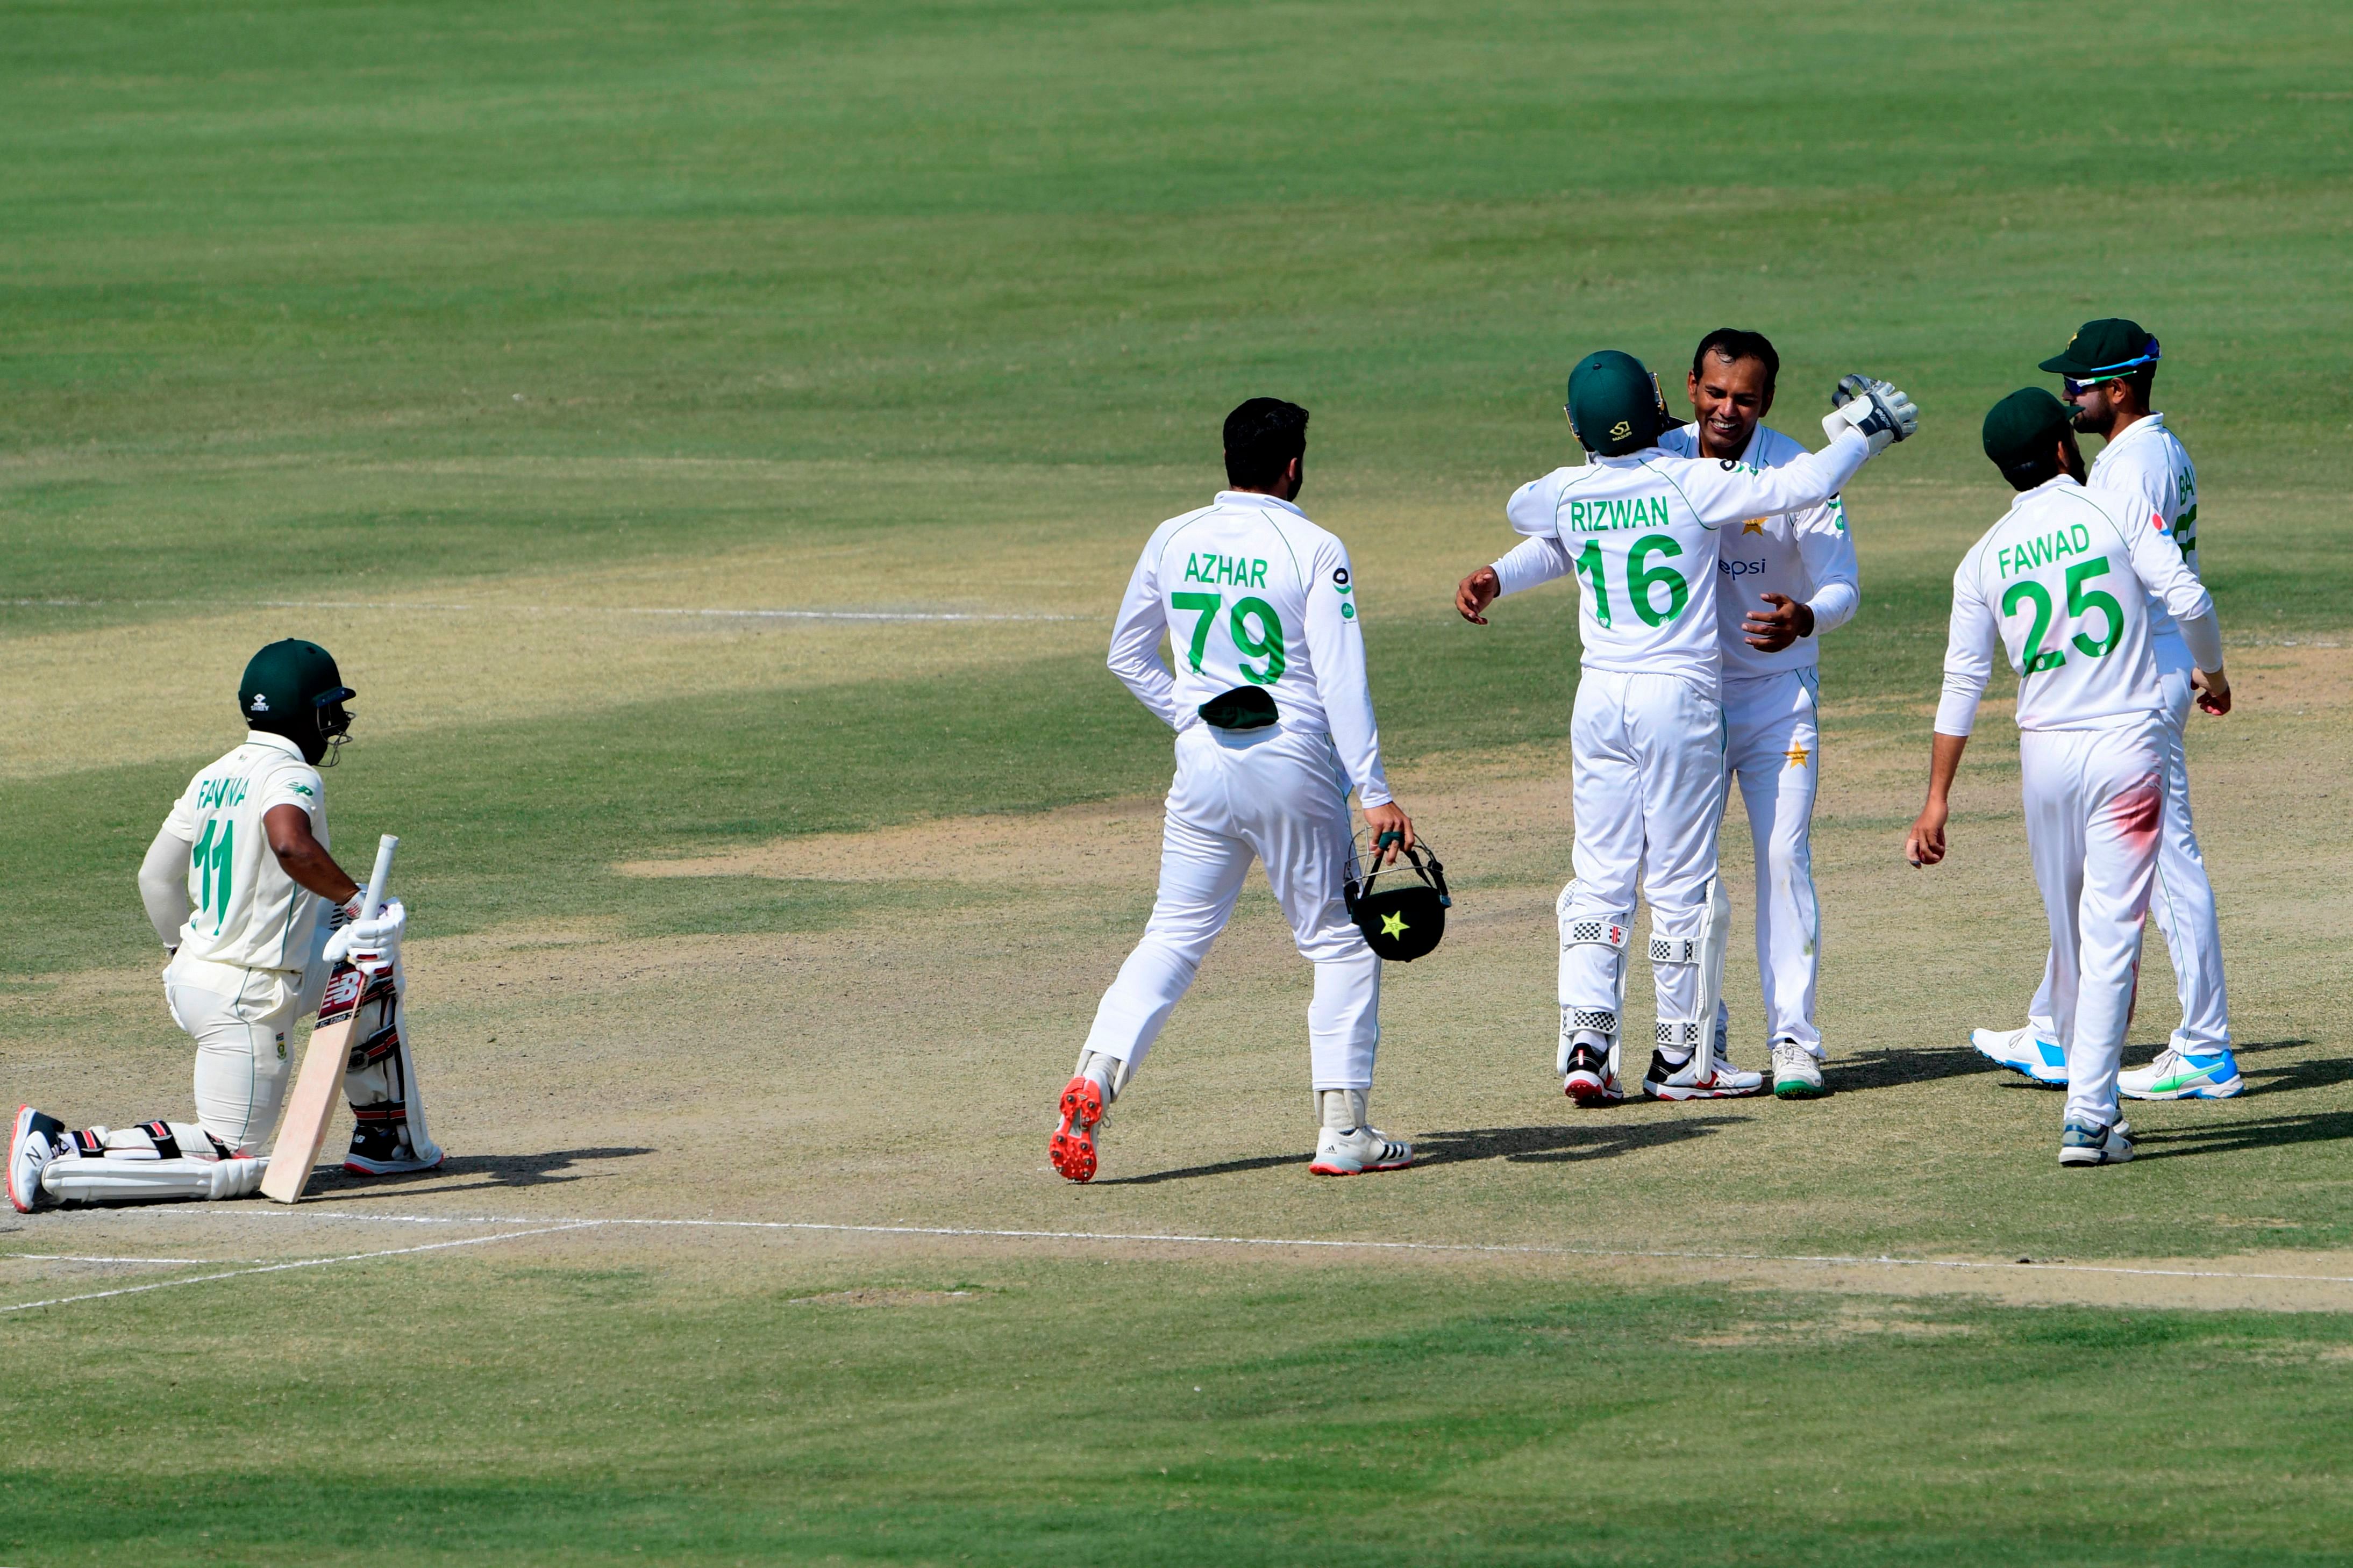 Pakistan's Nauman Ali (3R) celebrates with teammates after taking the wicket of South Africa's Temba Bavuma (L) during the fourth day of the first cricket Test match between Pakistan and South Africa at the National Stadium in Karachi on January 29, 2021. (Photo by Asif HASSAN / AFP)